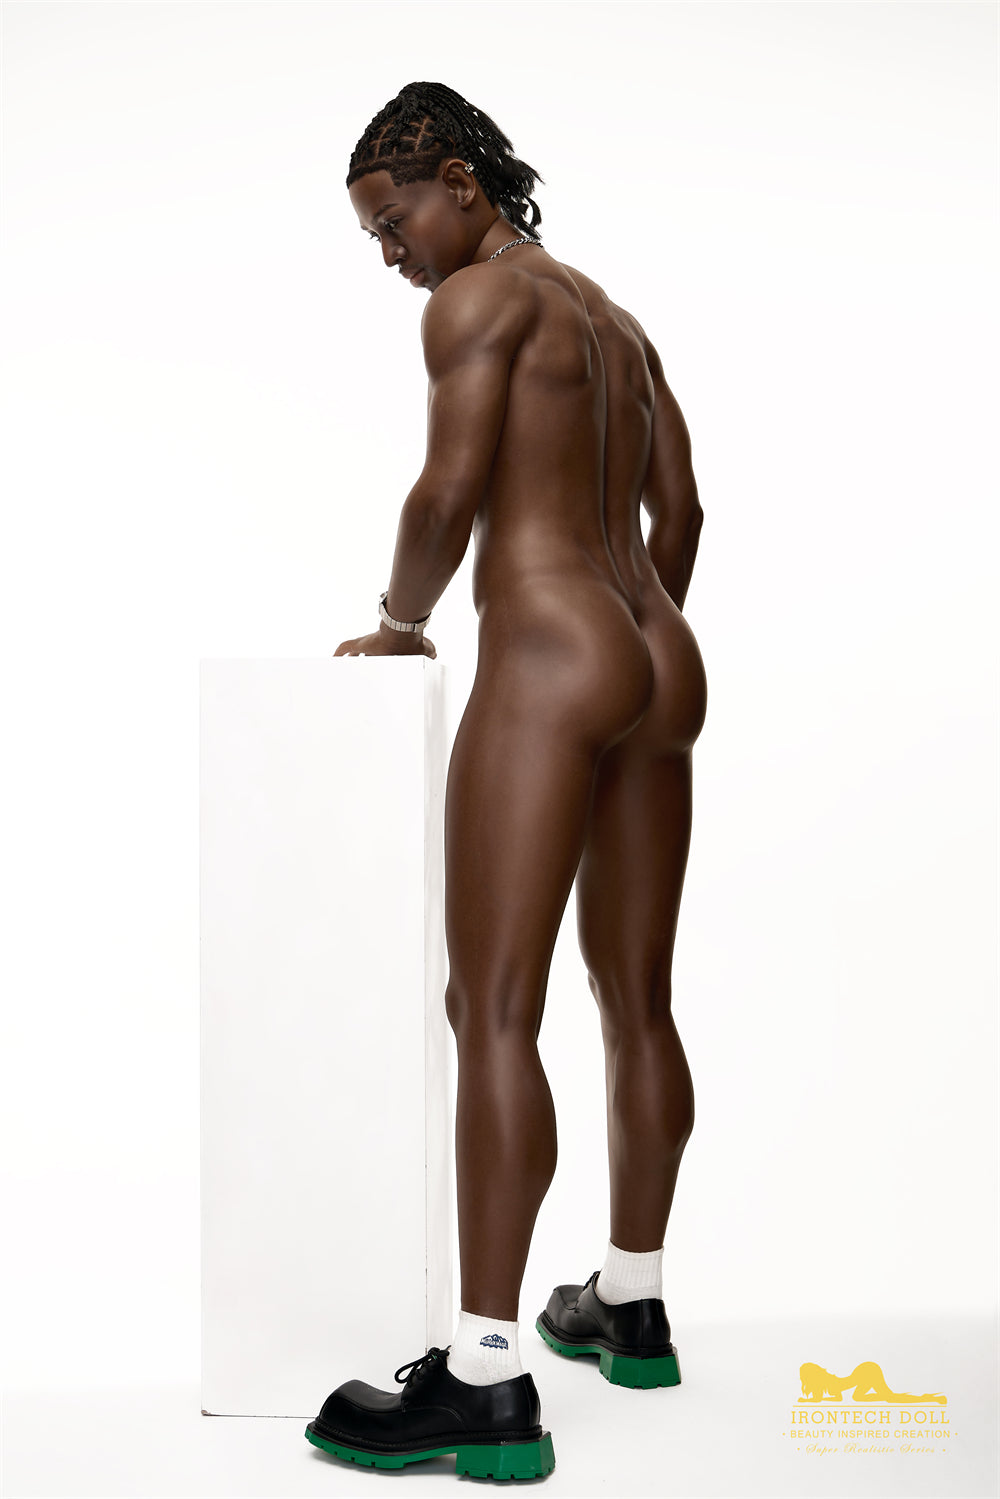 I-Irontech Doll 176 cm Silicone - Male James